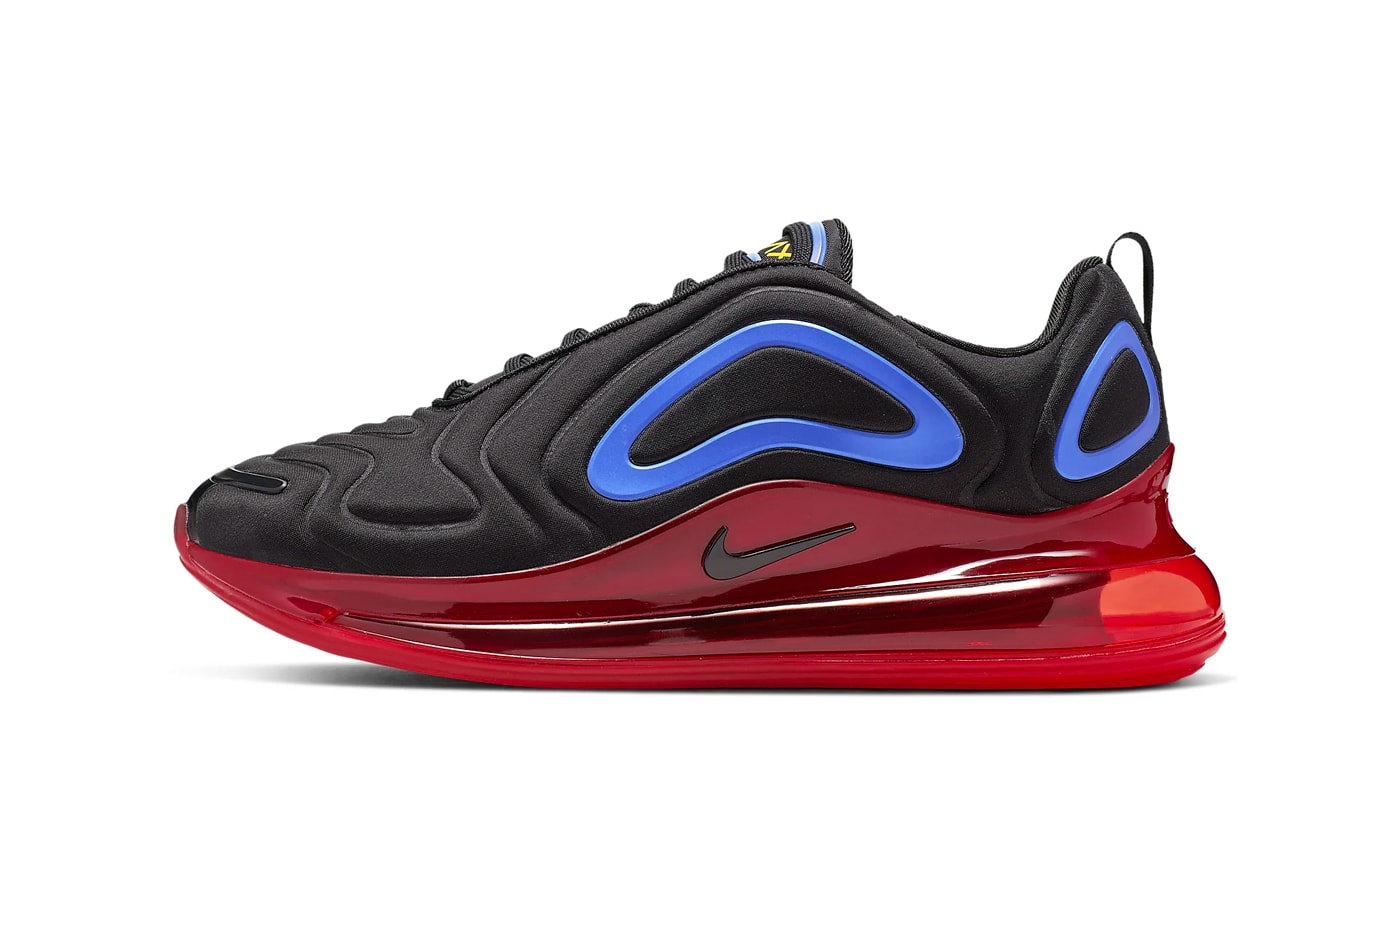 Nike Air Max 720 Primary Colors Release Info black hyper royal challenge red university gold sneakers shoes 